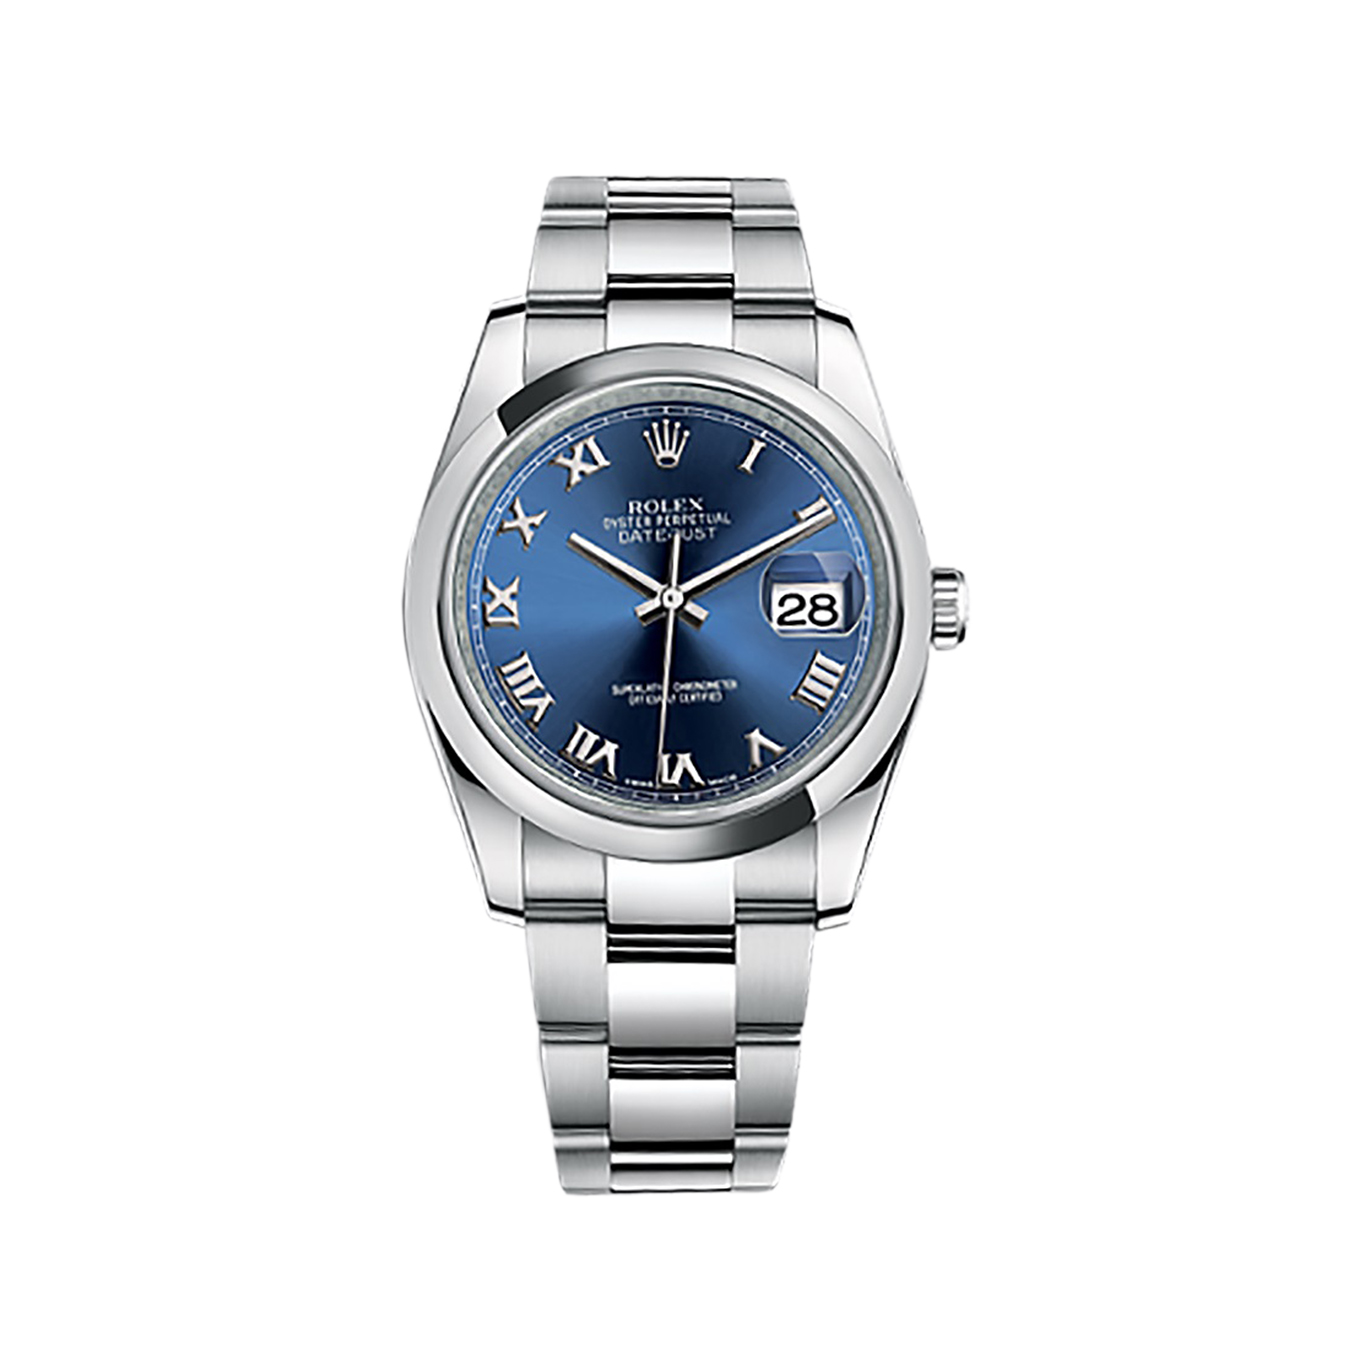 Datejust 36 116200 Stainless Steel Watch (Blue)